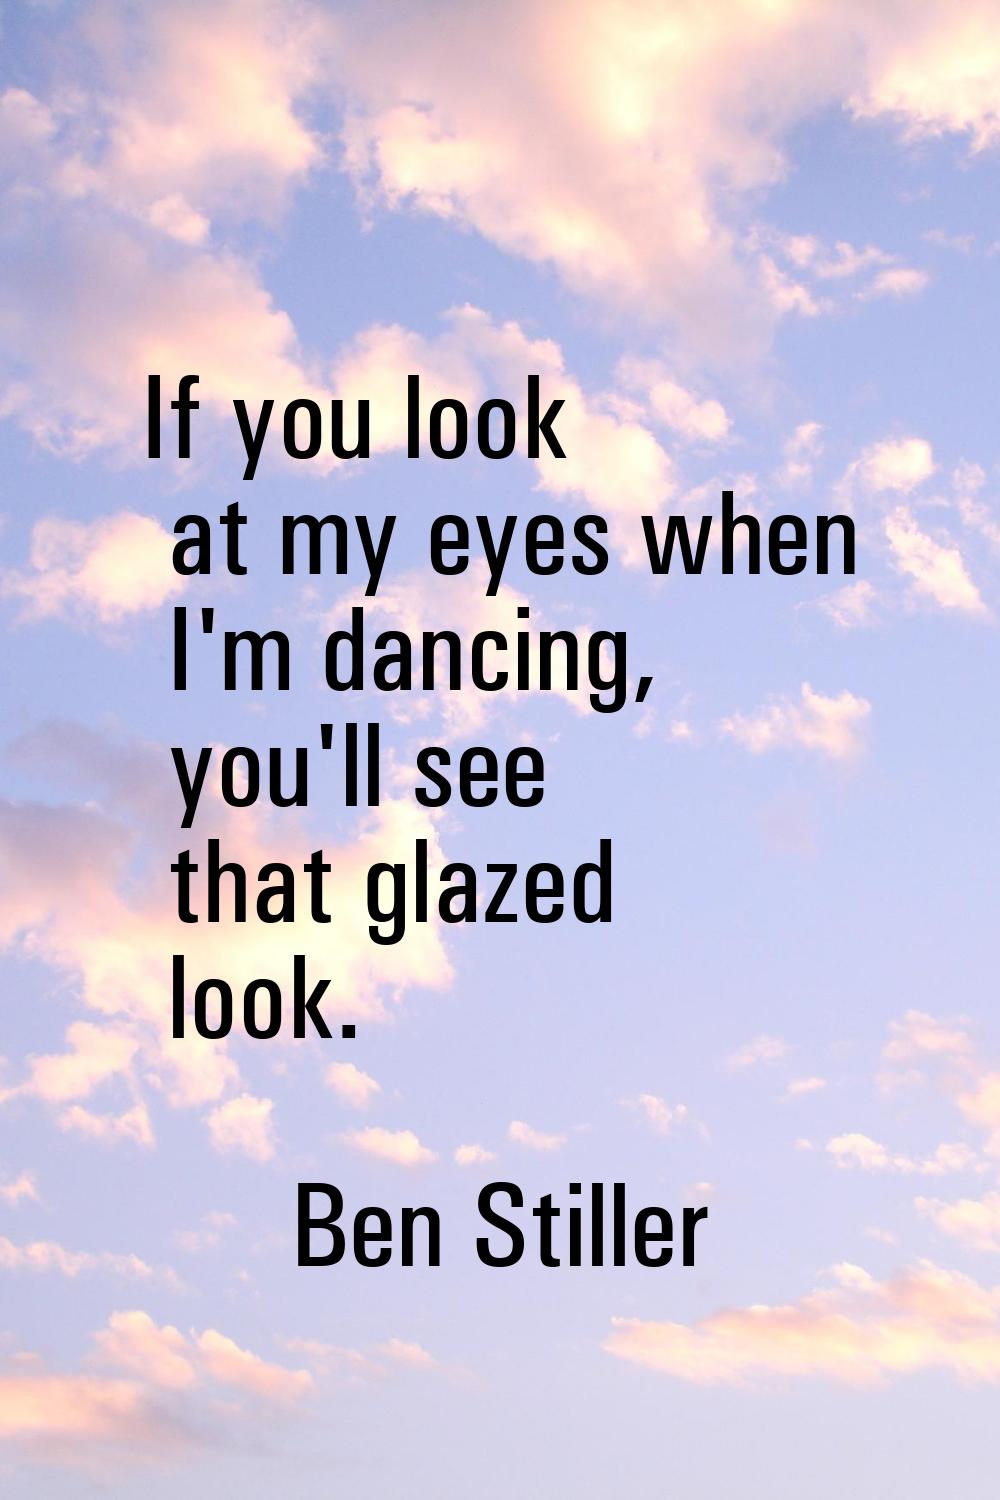 If you look at my eyes when I'm dancing, you'll see that glazed look.